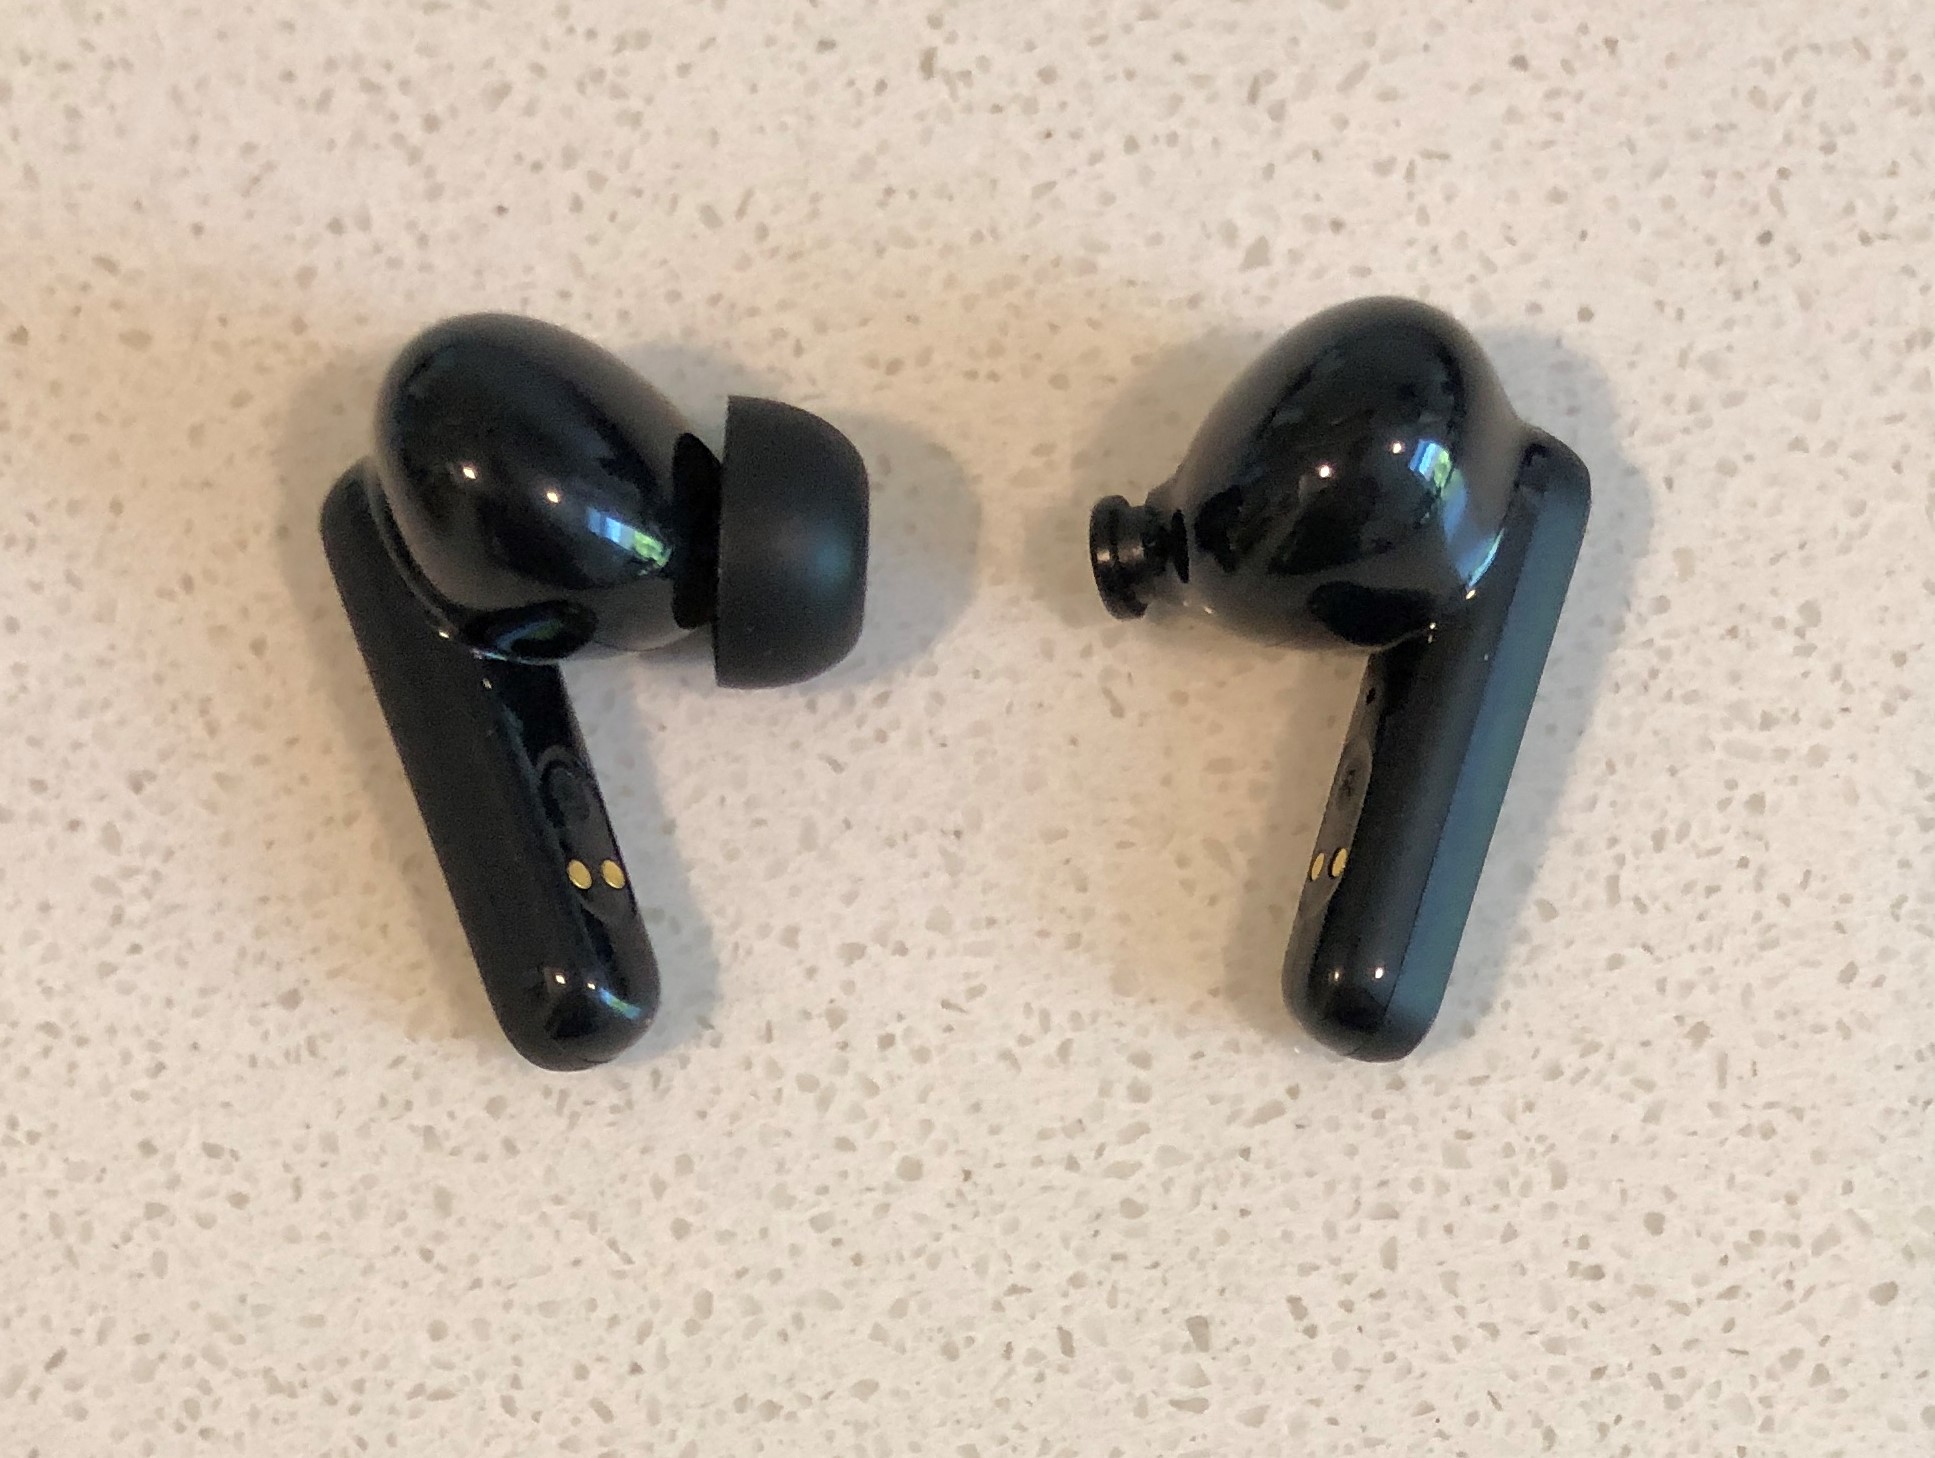 Soundcore P20i earbud tip and nozzle